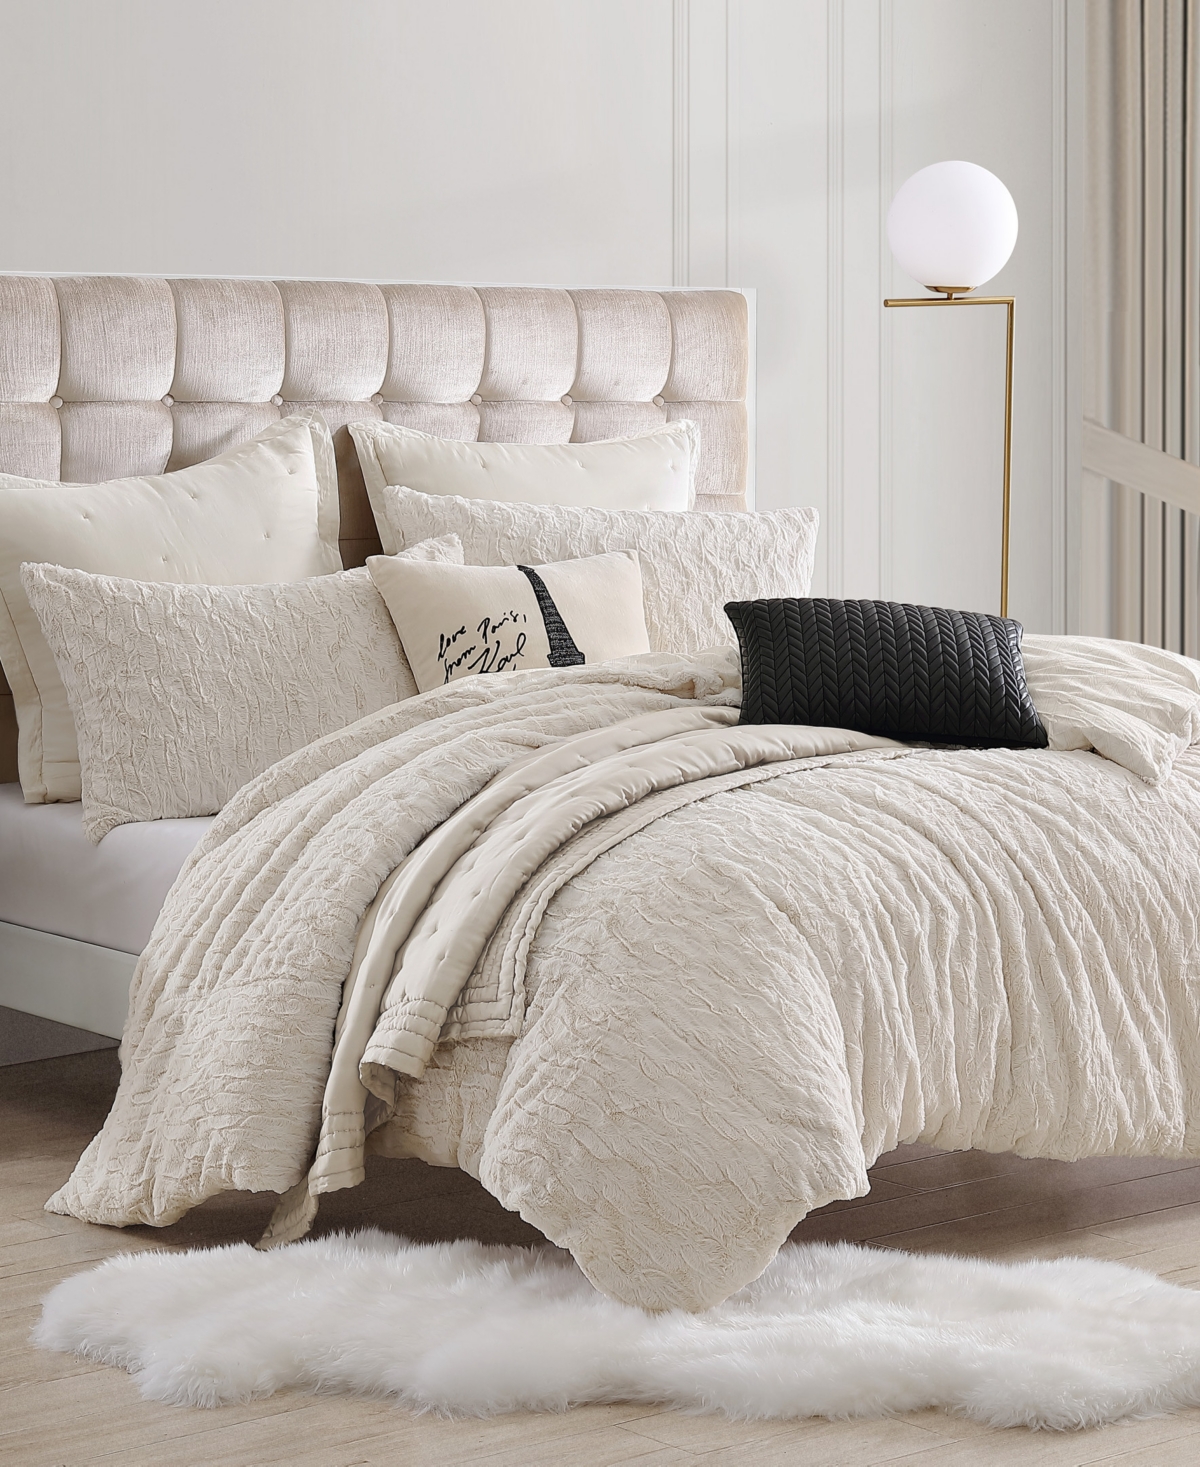 Karl Lagerfeld Soft And Warm Heavenly 3 Piece Duvet Cover Set, Full/queen In Ivory